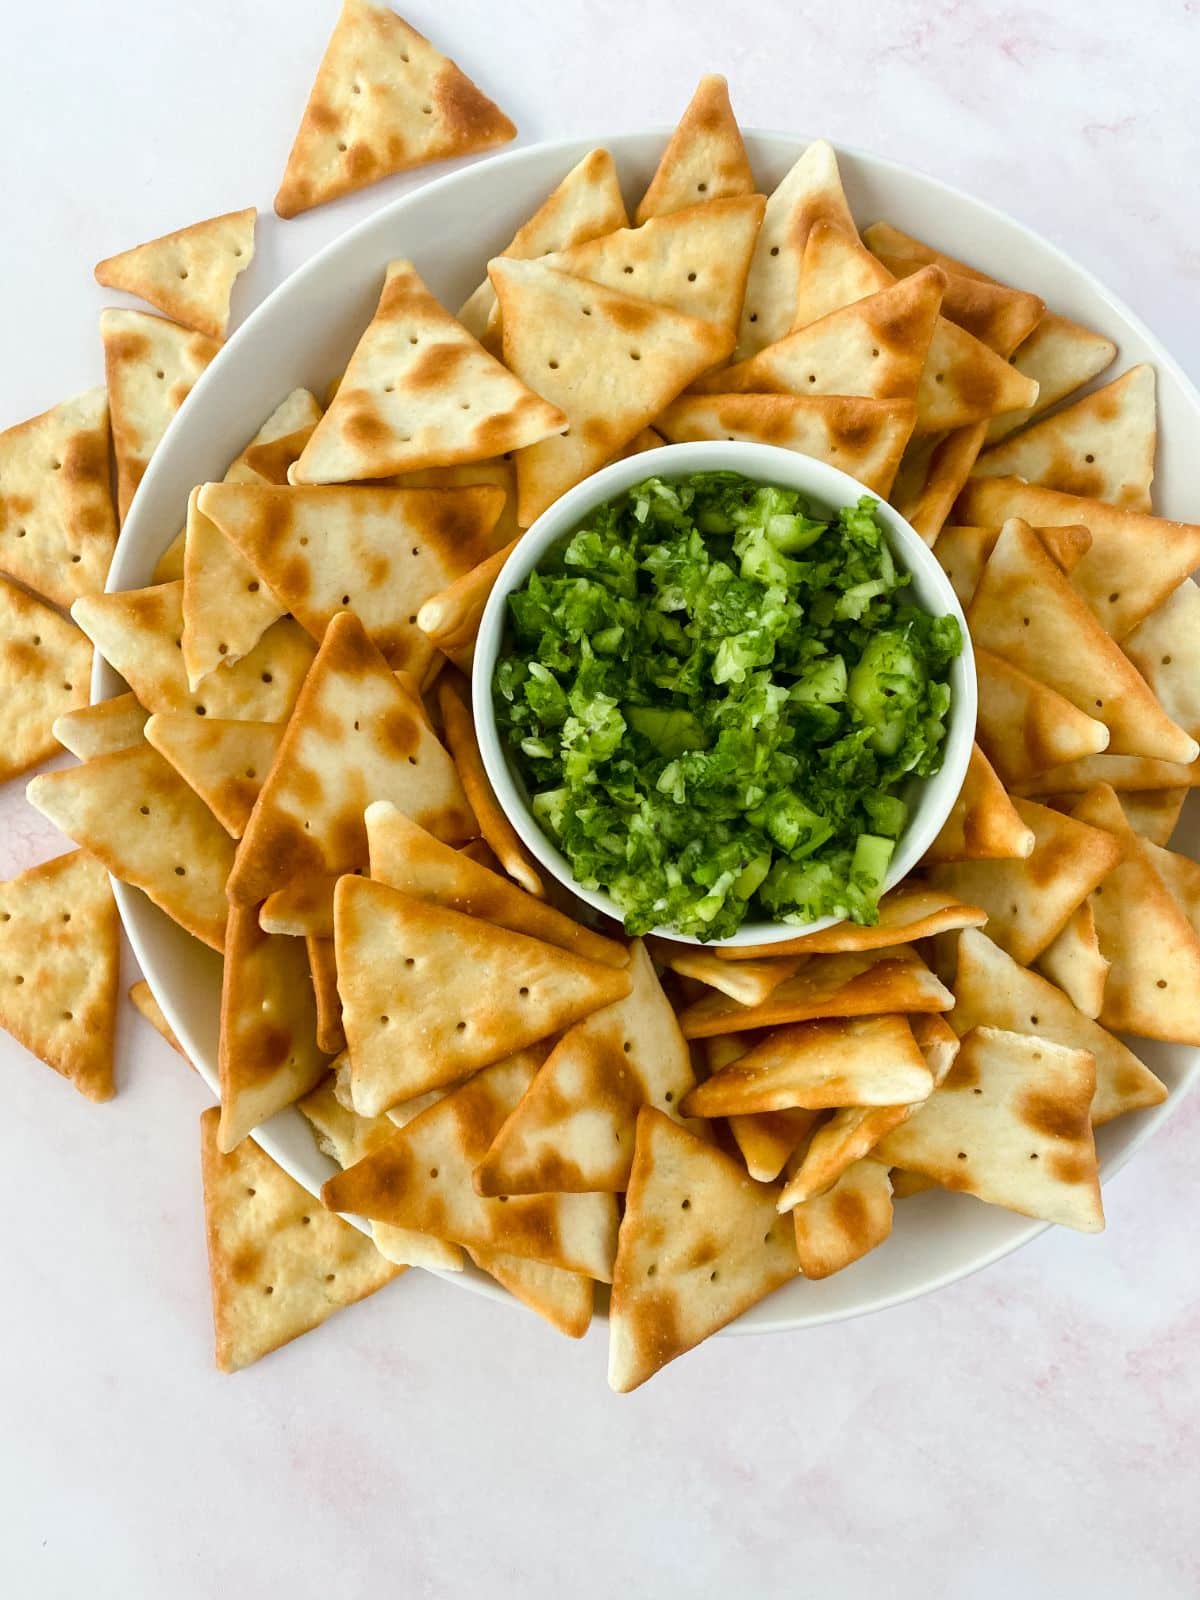 bowl of chips with relish in center of platter